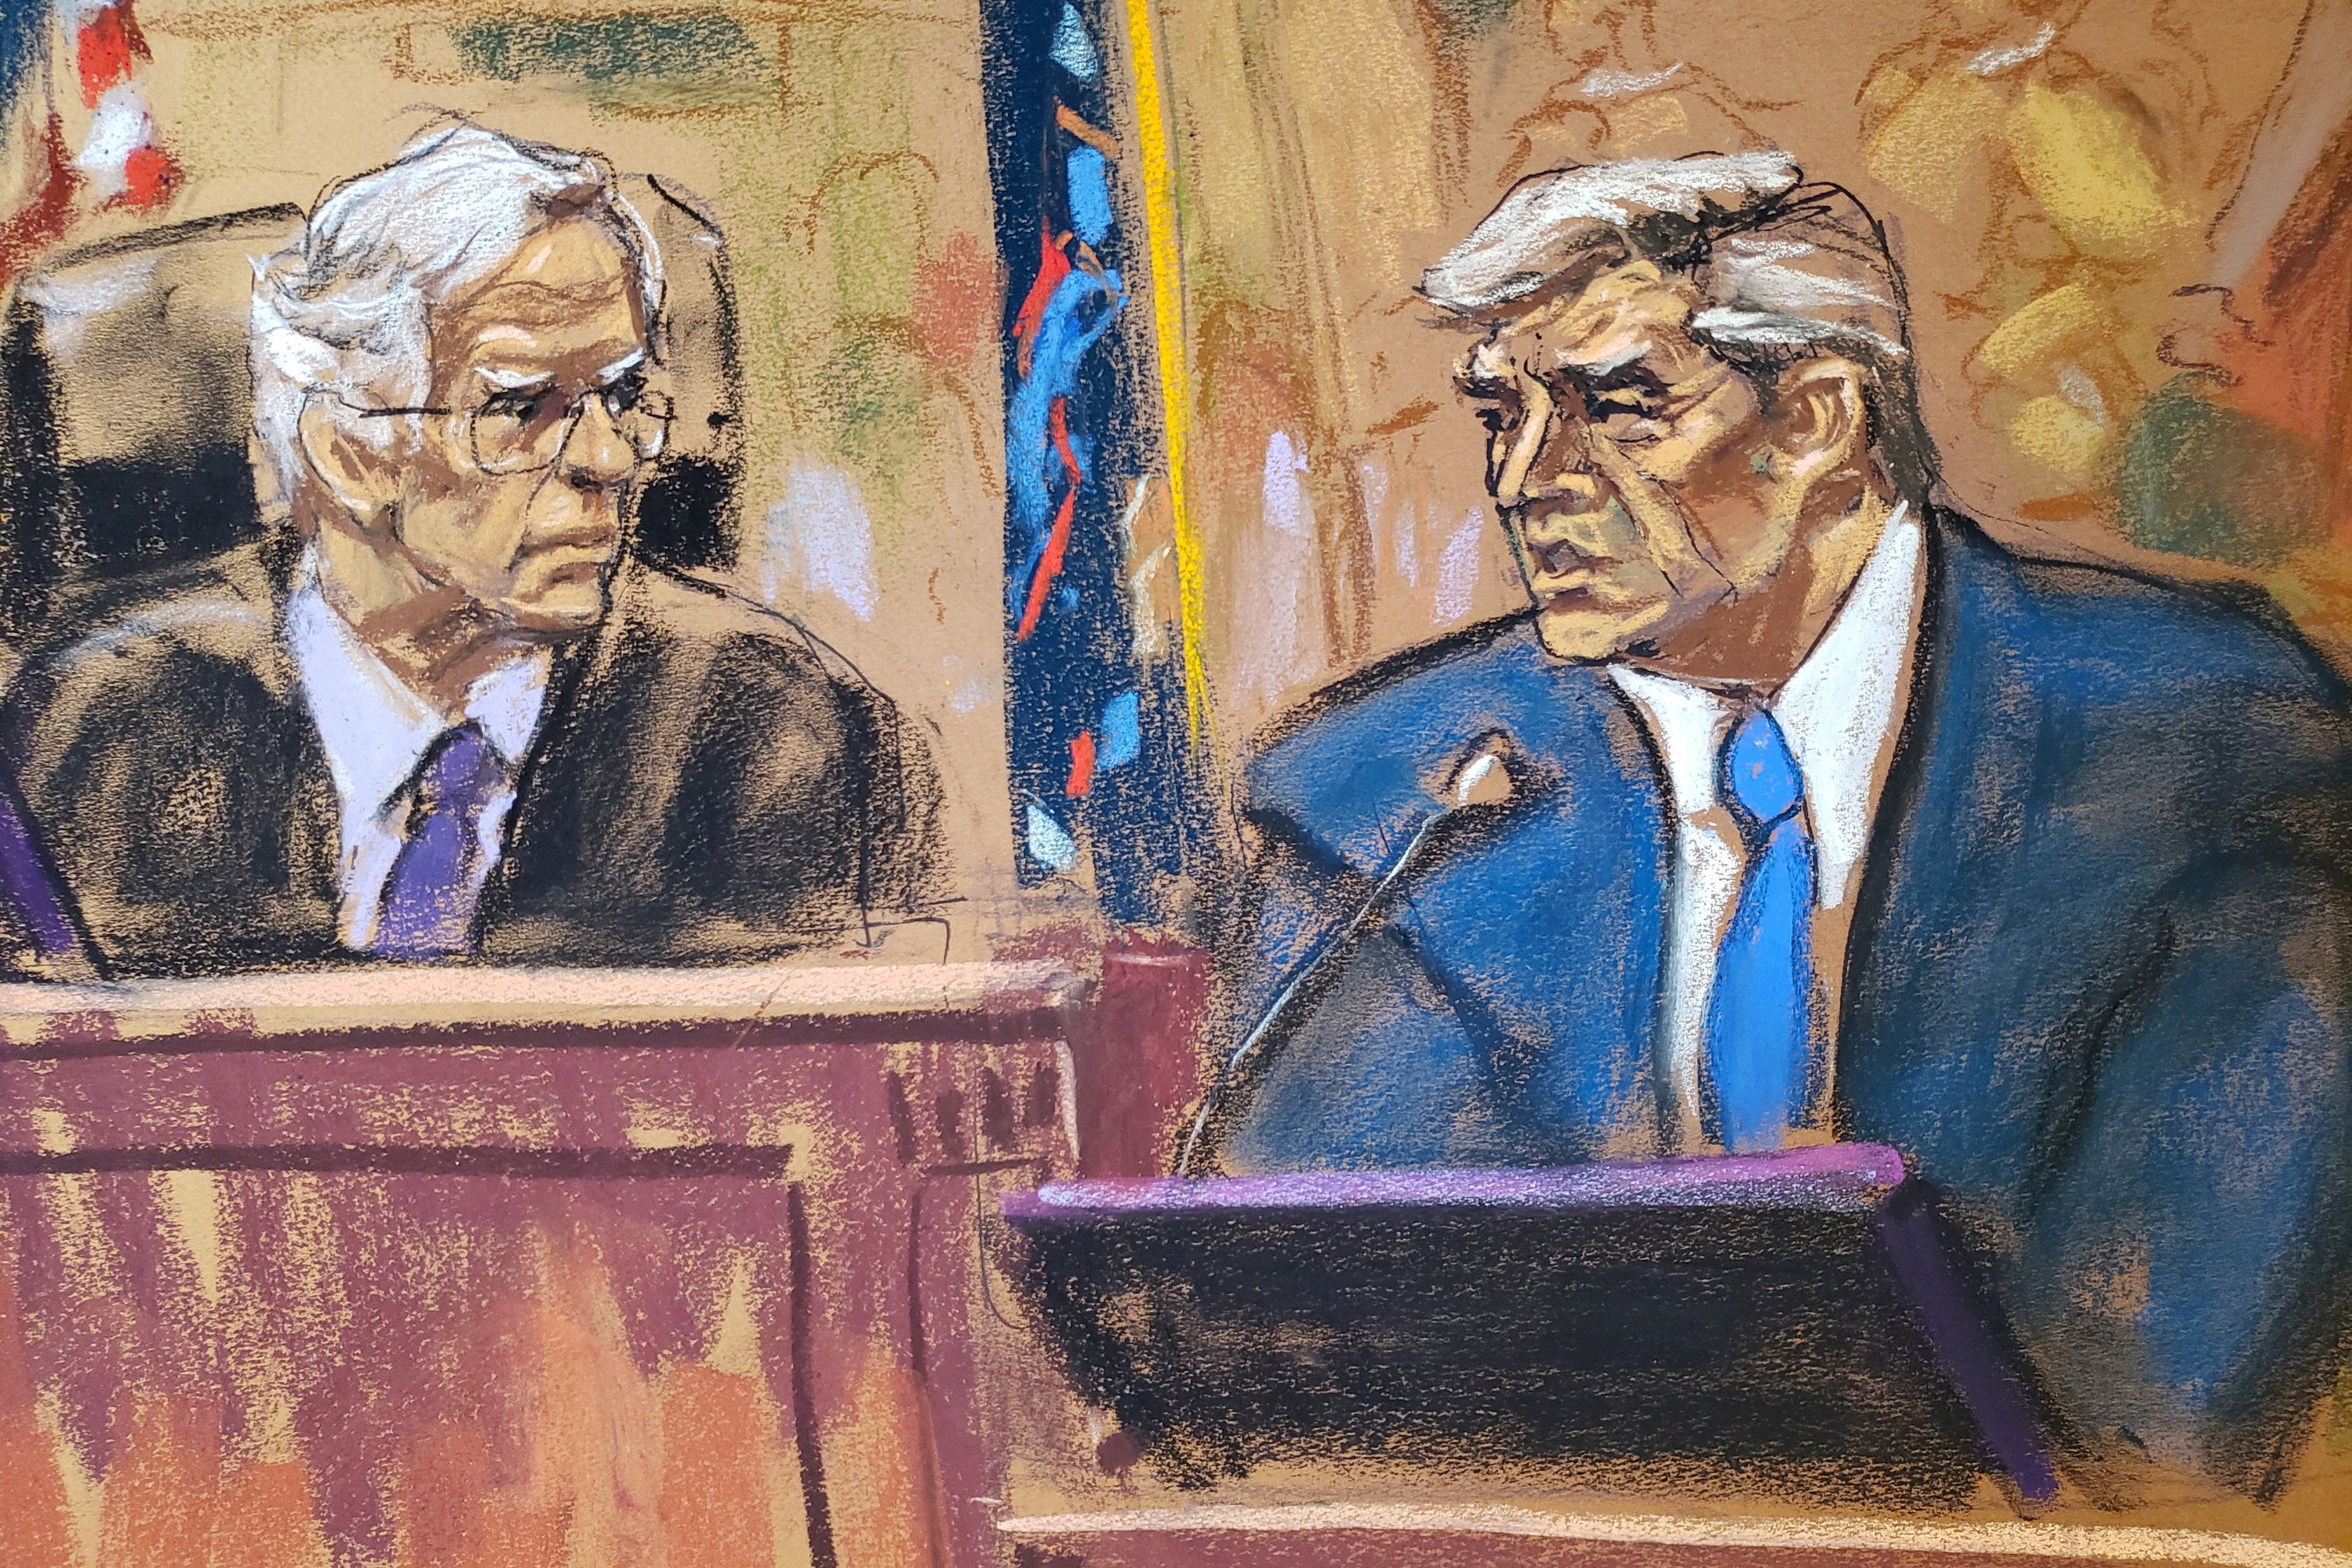 A courtroom sketch pictures Donald Trump on the witness stand testifying about his comments that prompted the judge overseeing his fraud trial to fine him $10,000 for violating a gag order